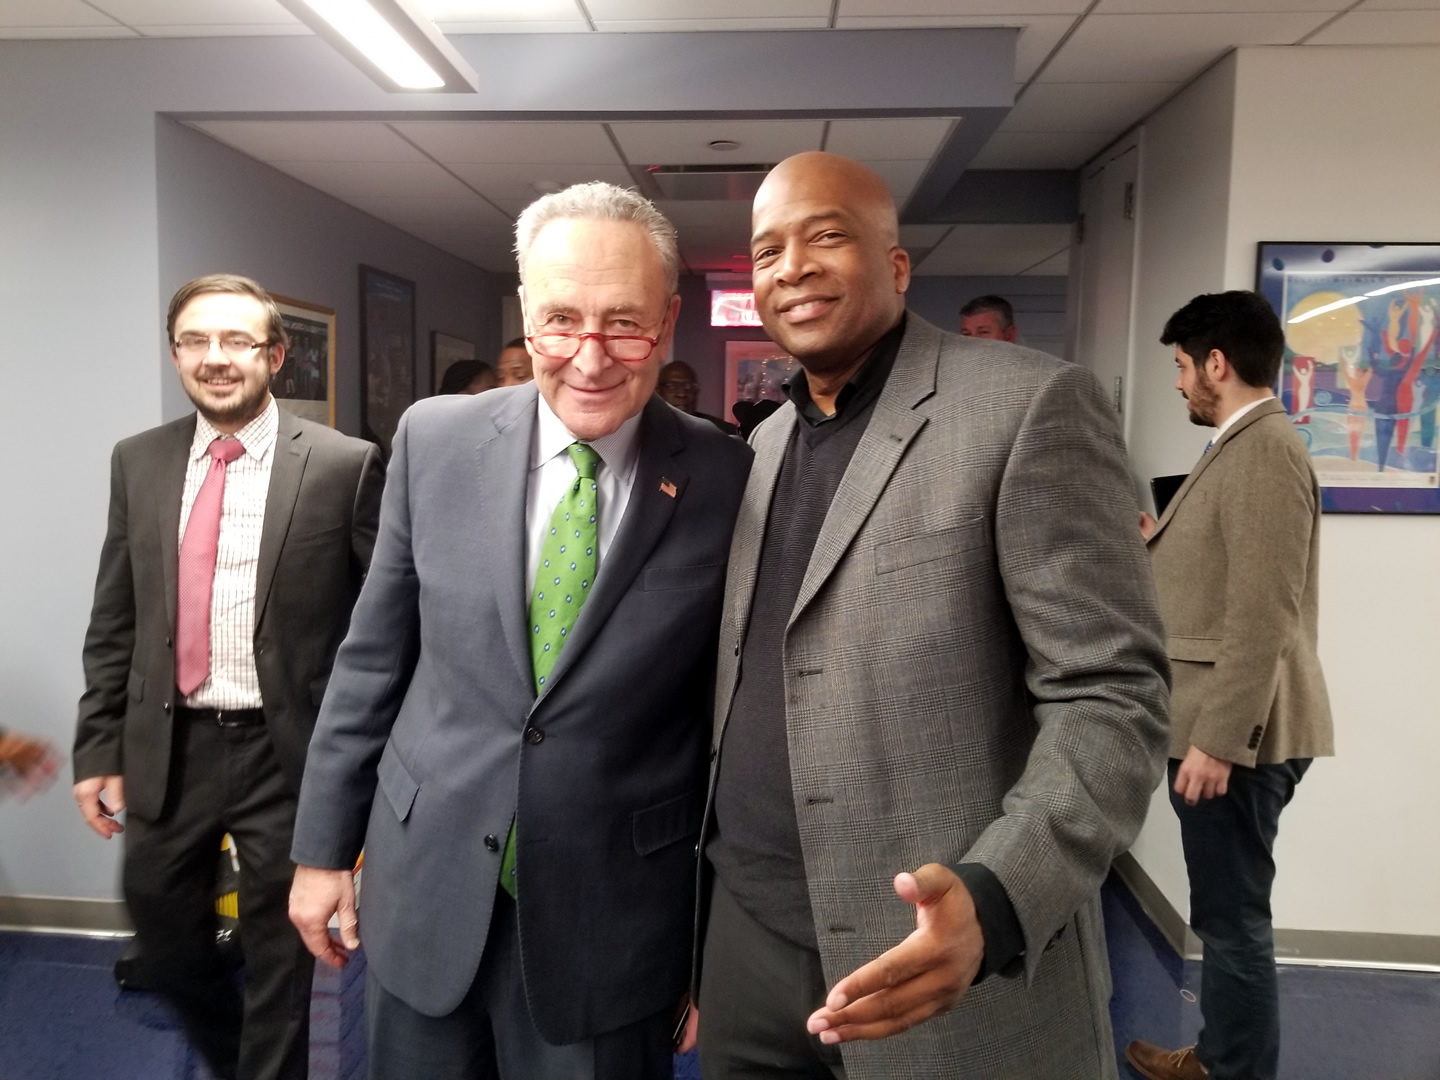 2020 Event / Provided Security for Senator Schumer & Other Dignitaries